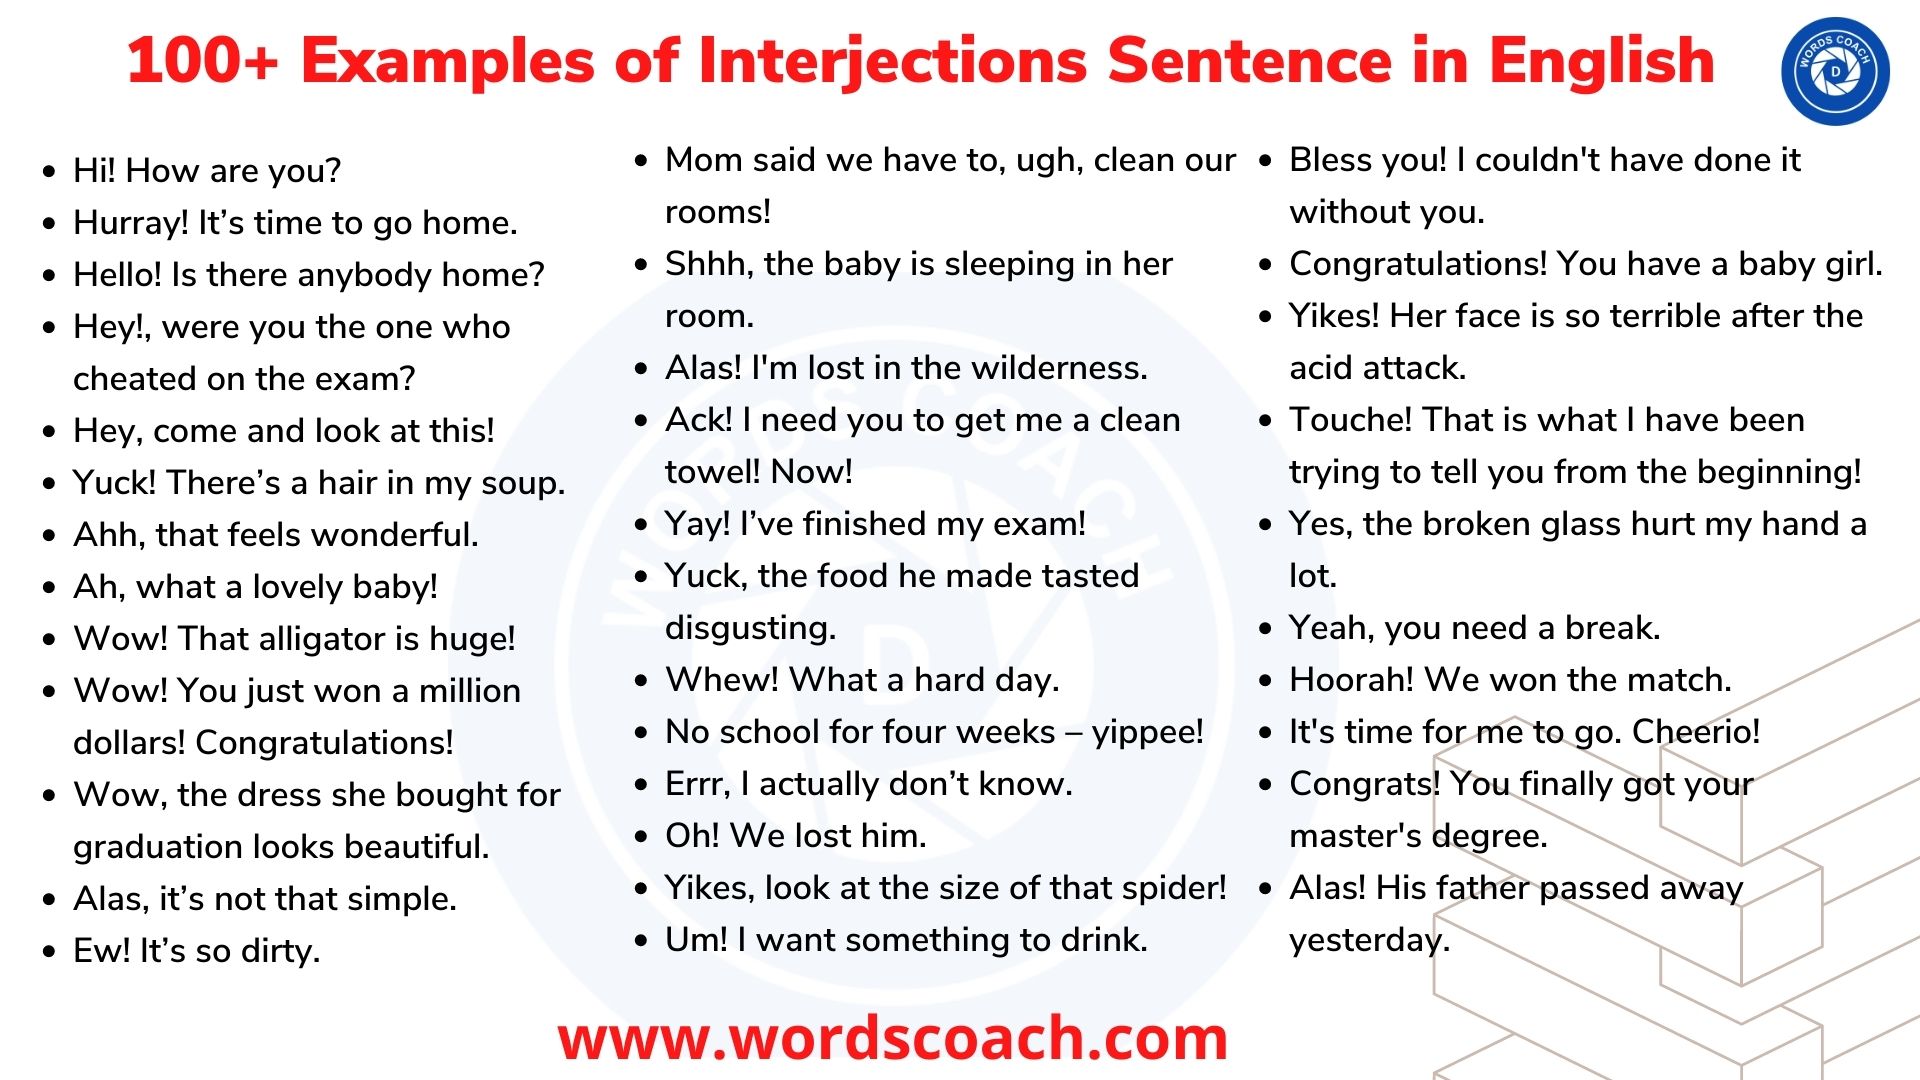 Interjections Sentence: 100+ Examples of Interjections Sentence in English